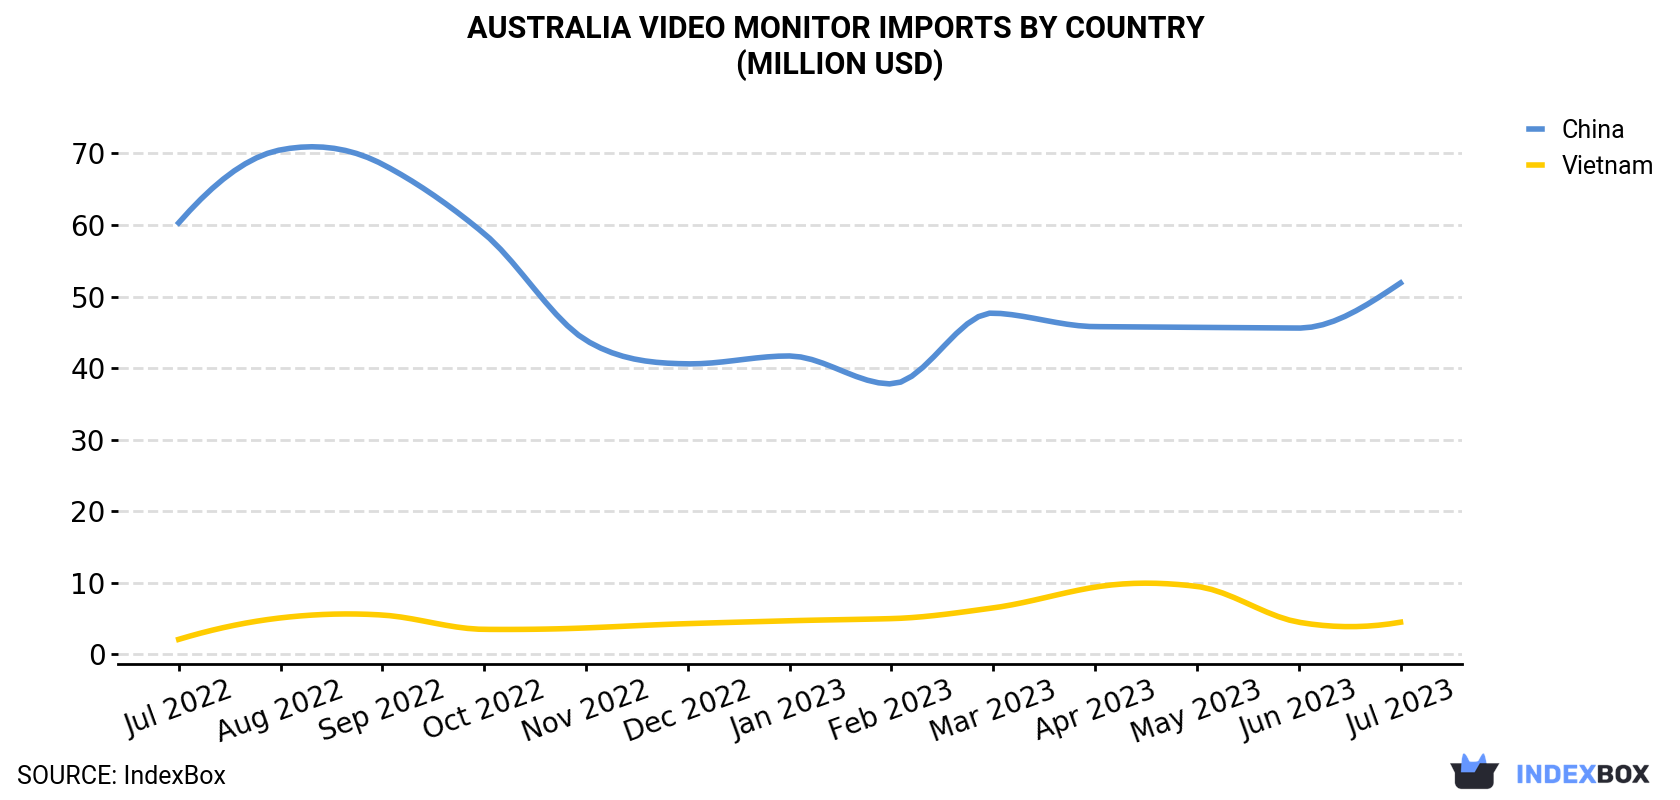 Australia Video Monitor Imports By Country (Million USD)